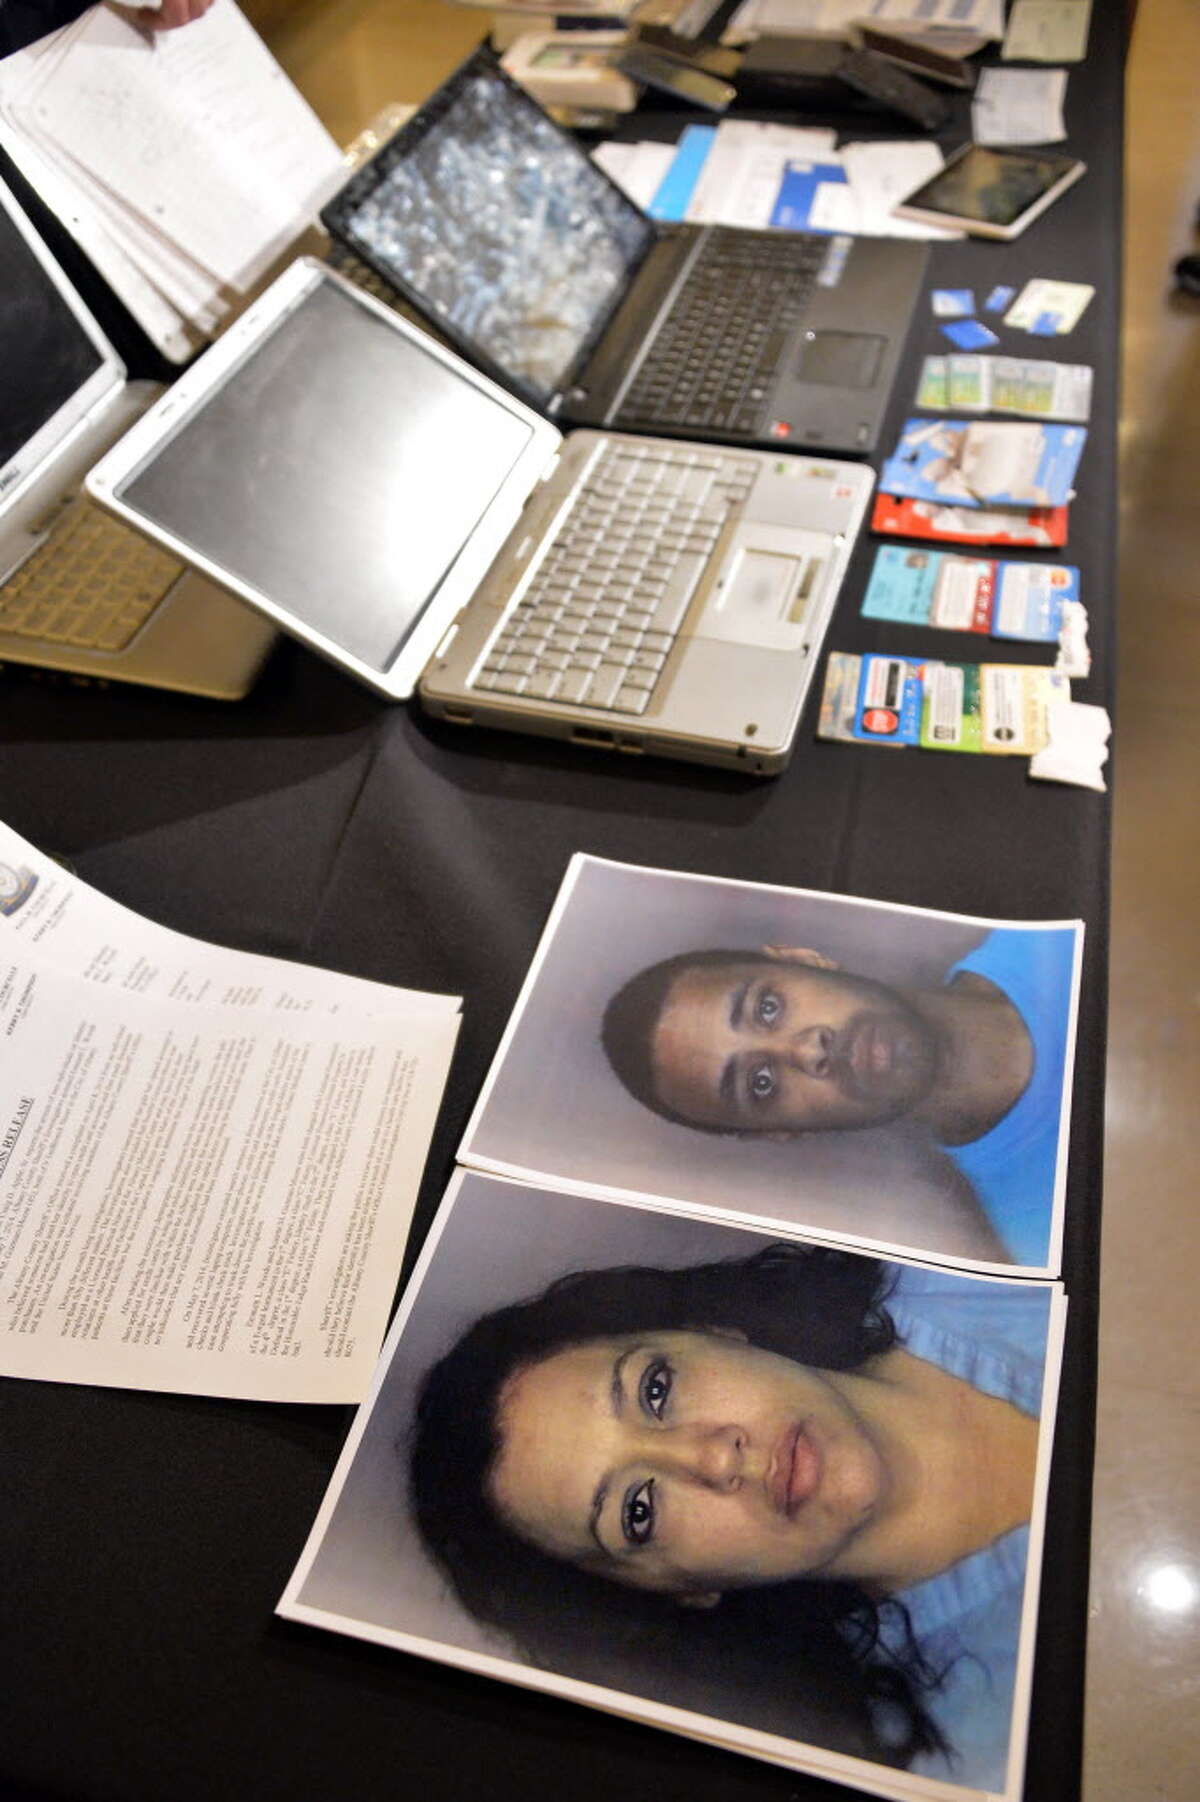 Albany Co. Sheriff Dept. photos of Suzette M. Guzman-Moore, bottom, and Emmett L. Woods on a table full of evidence at the announcement of their arrest on Identity Theft charges during at news conference Thursday May 8, 2014, in Albany, NY. (John Carl D'Annibale / Times Union)